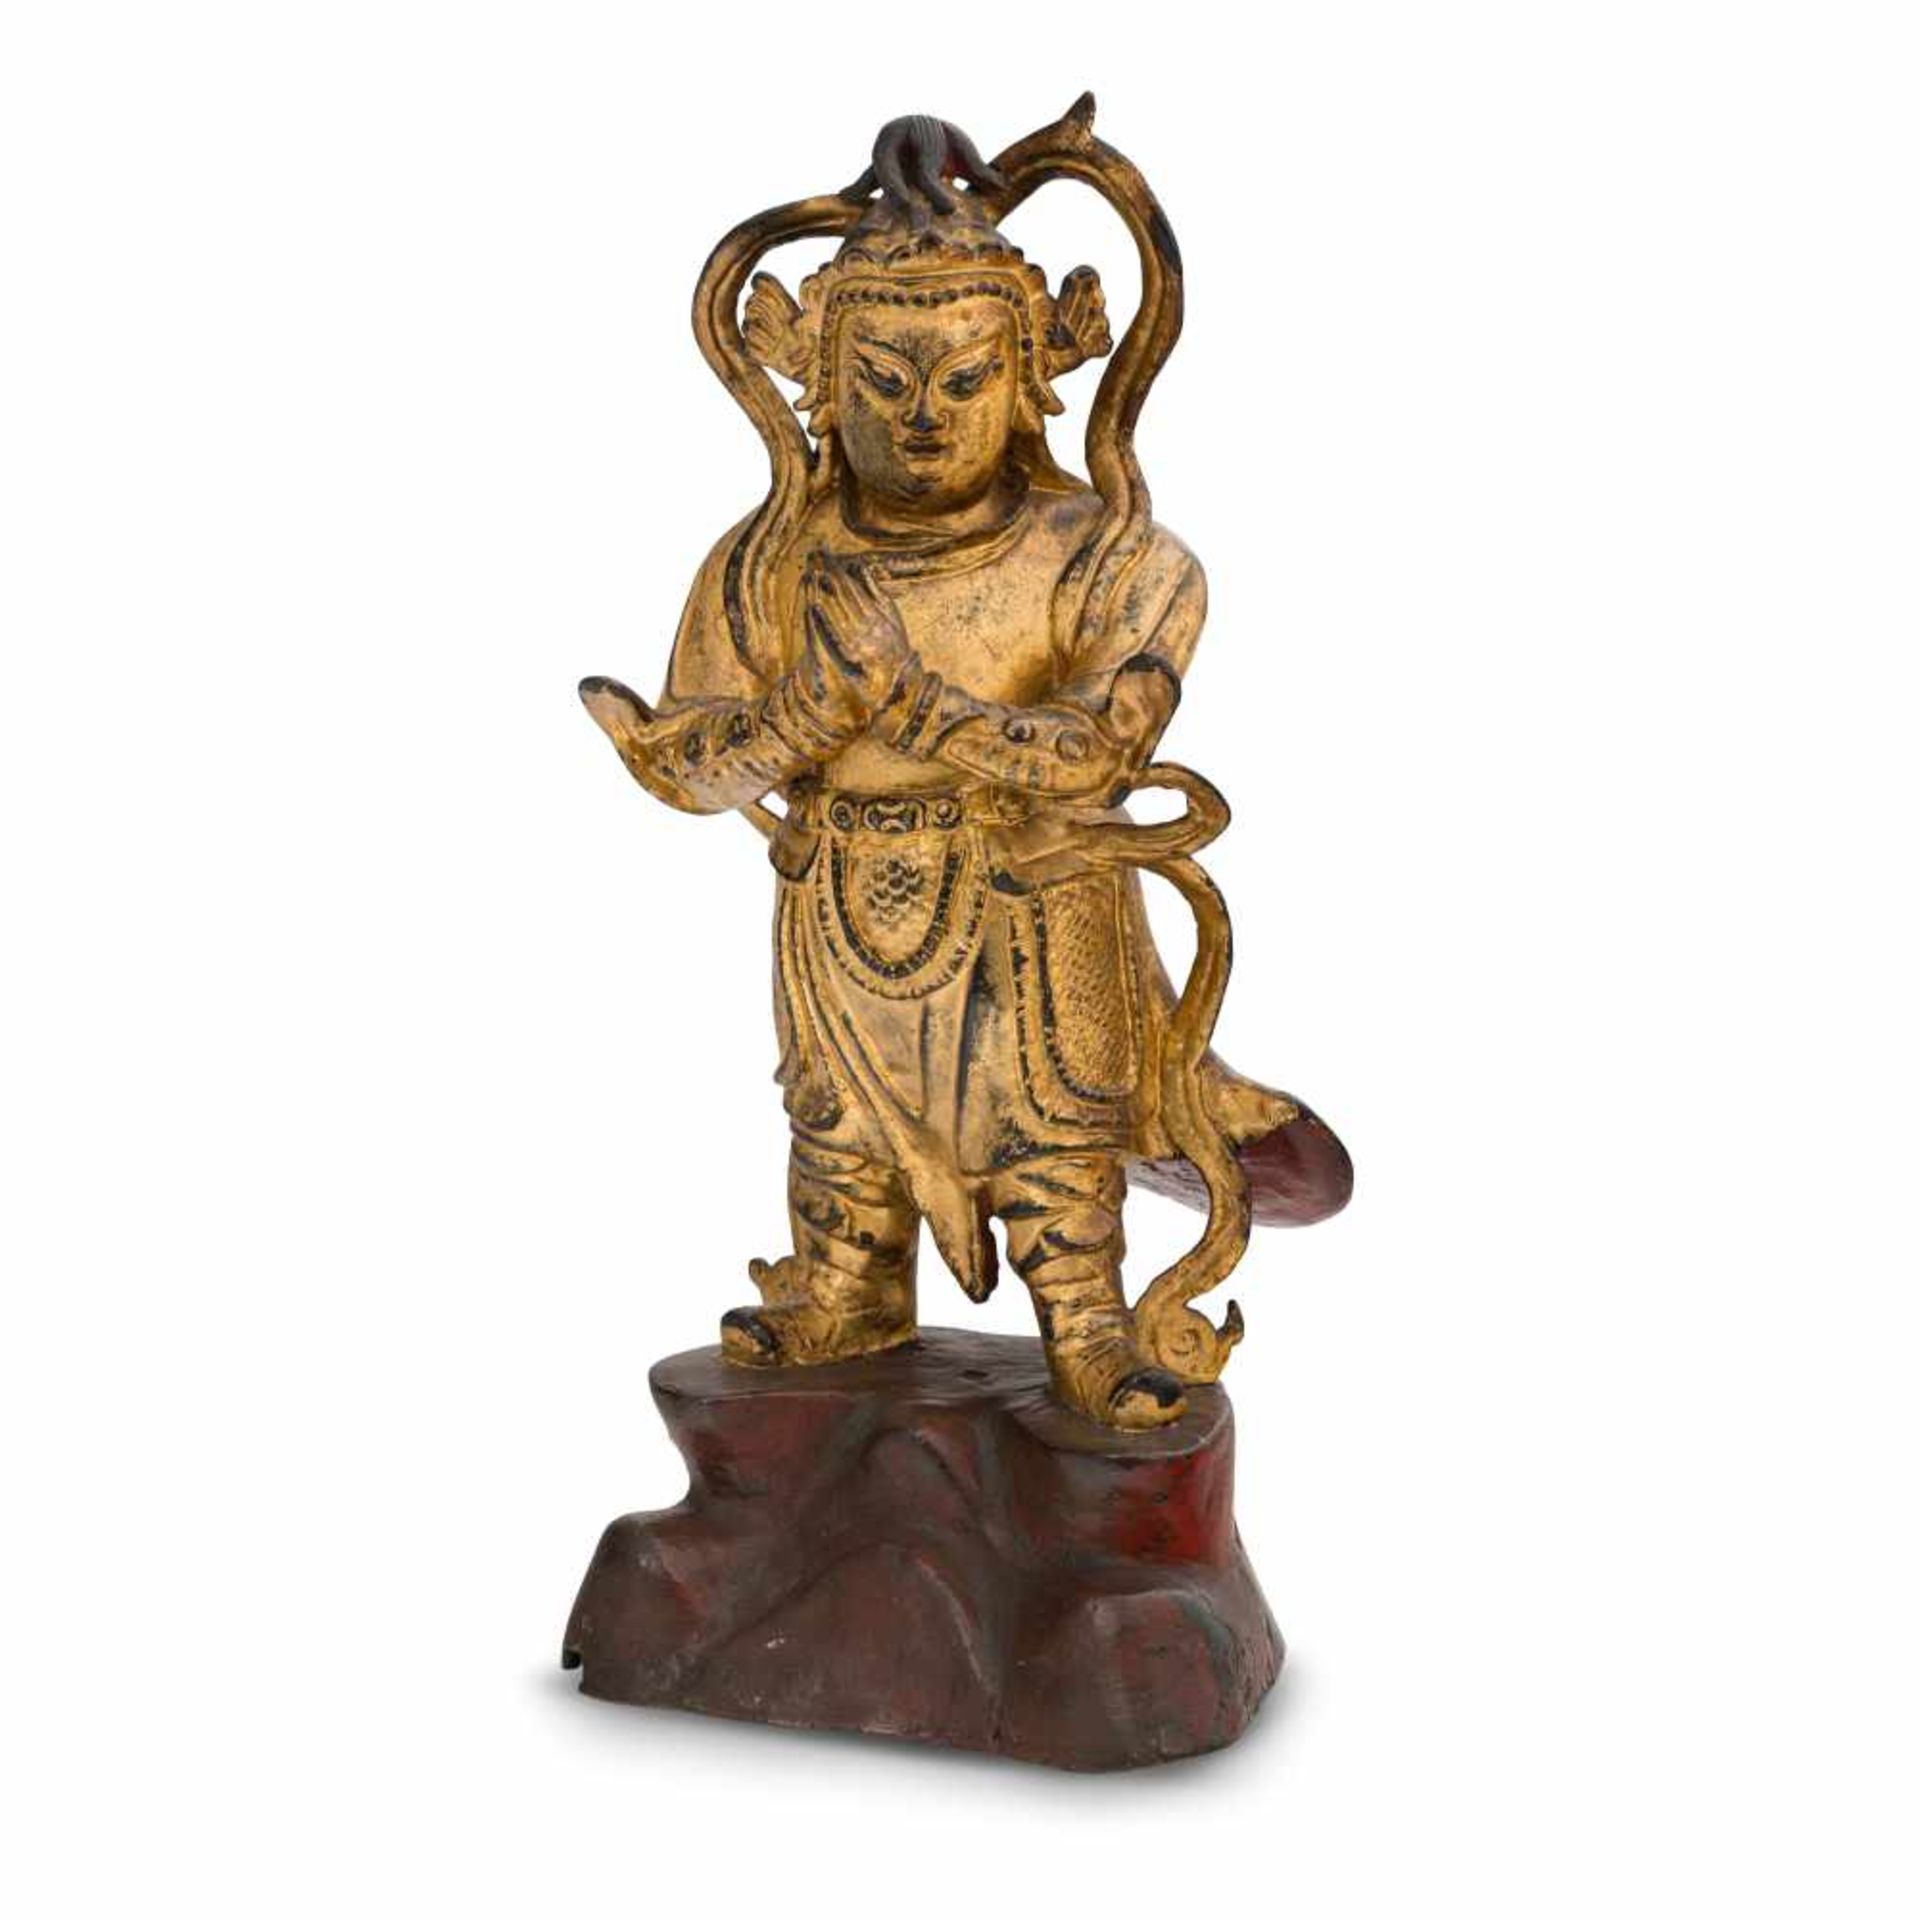 A Chinese Gilt-Lacquered Bronze Figure of Weituo